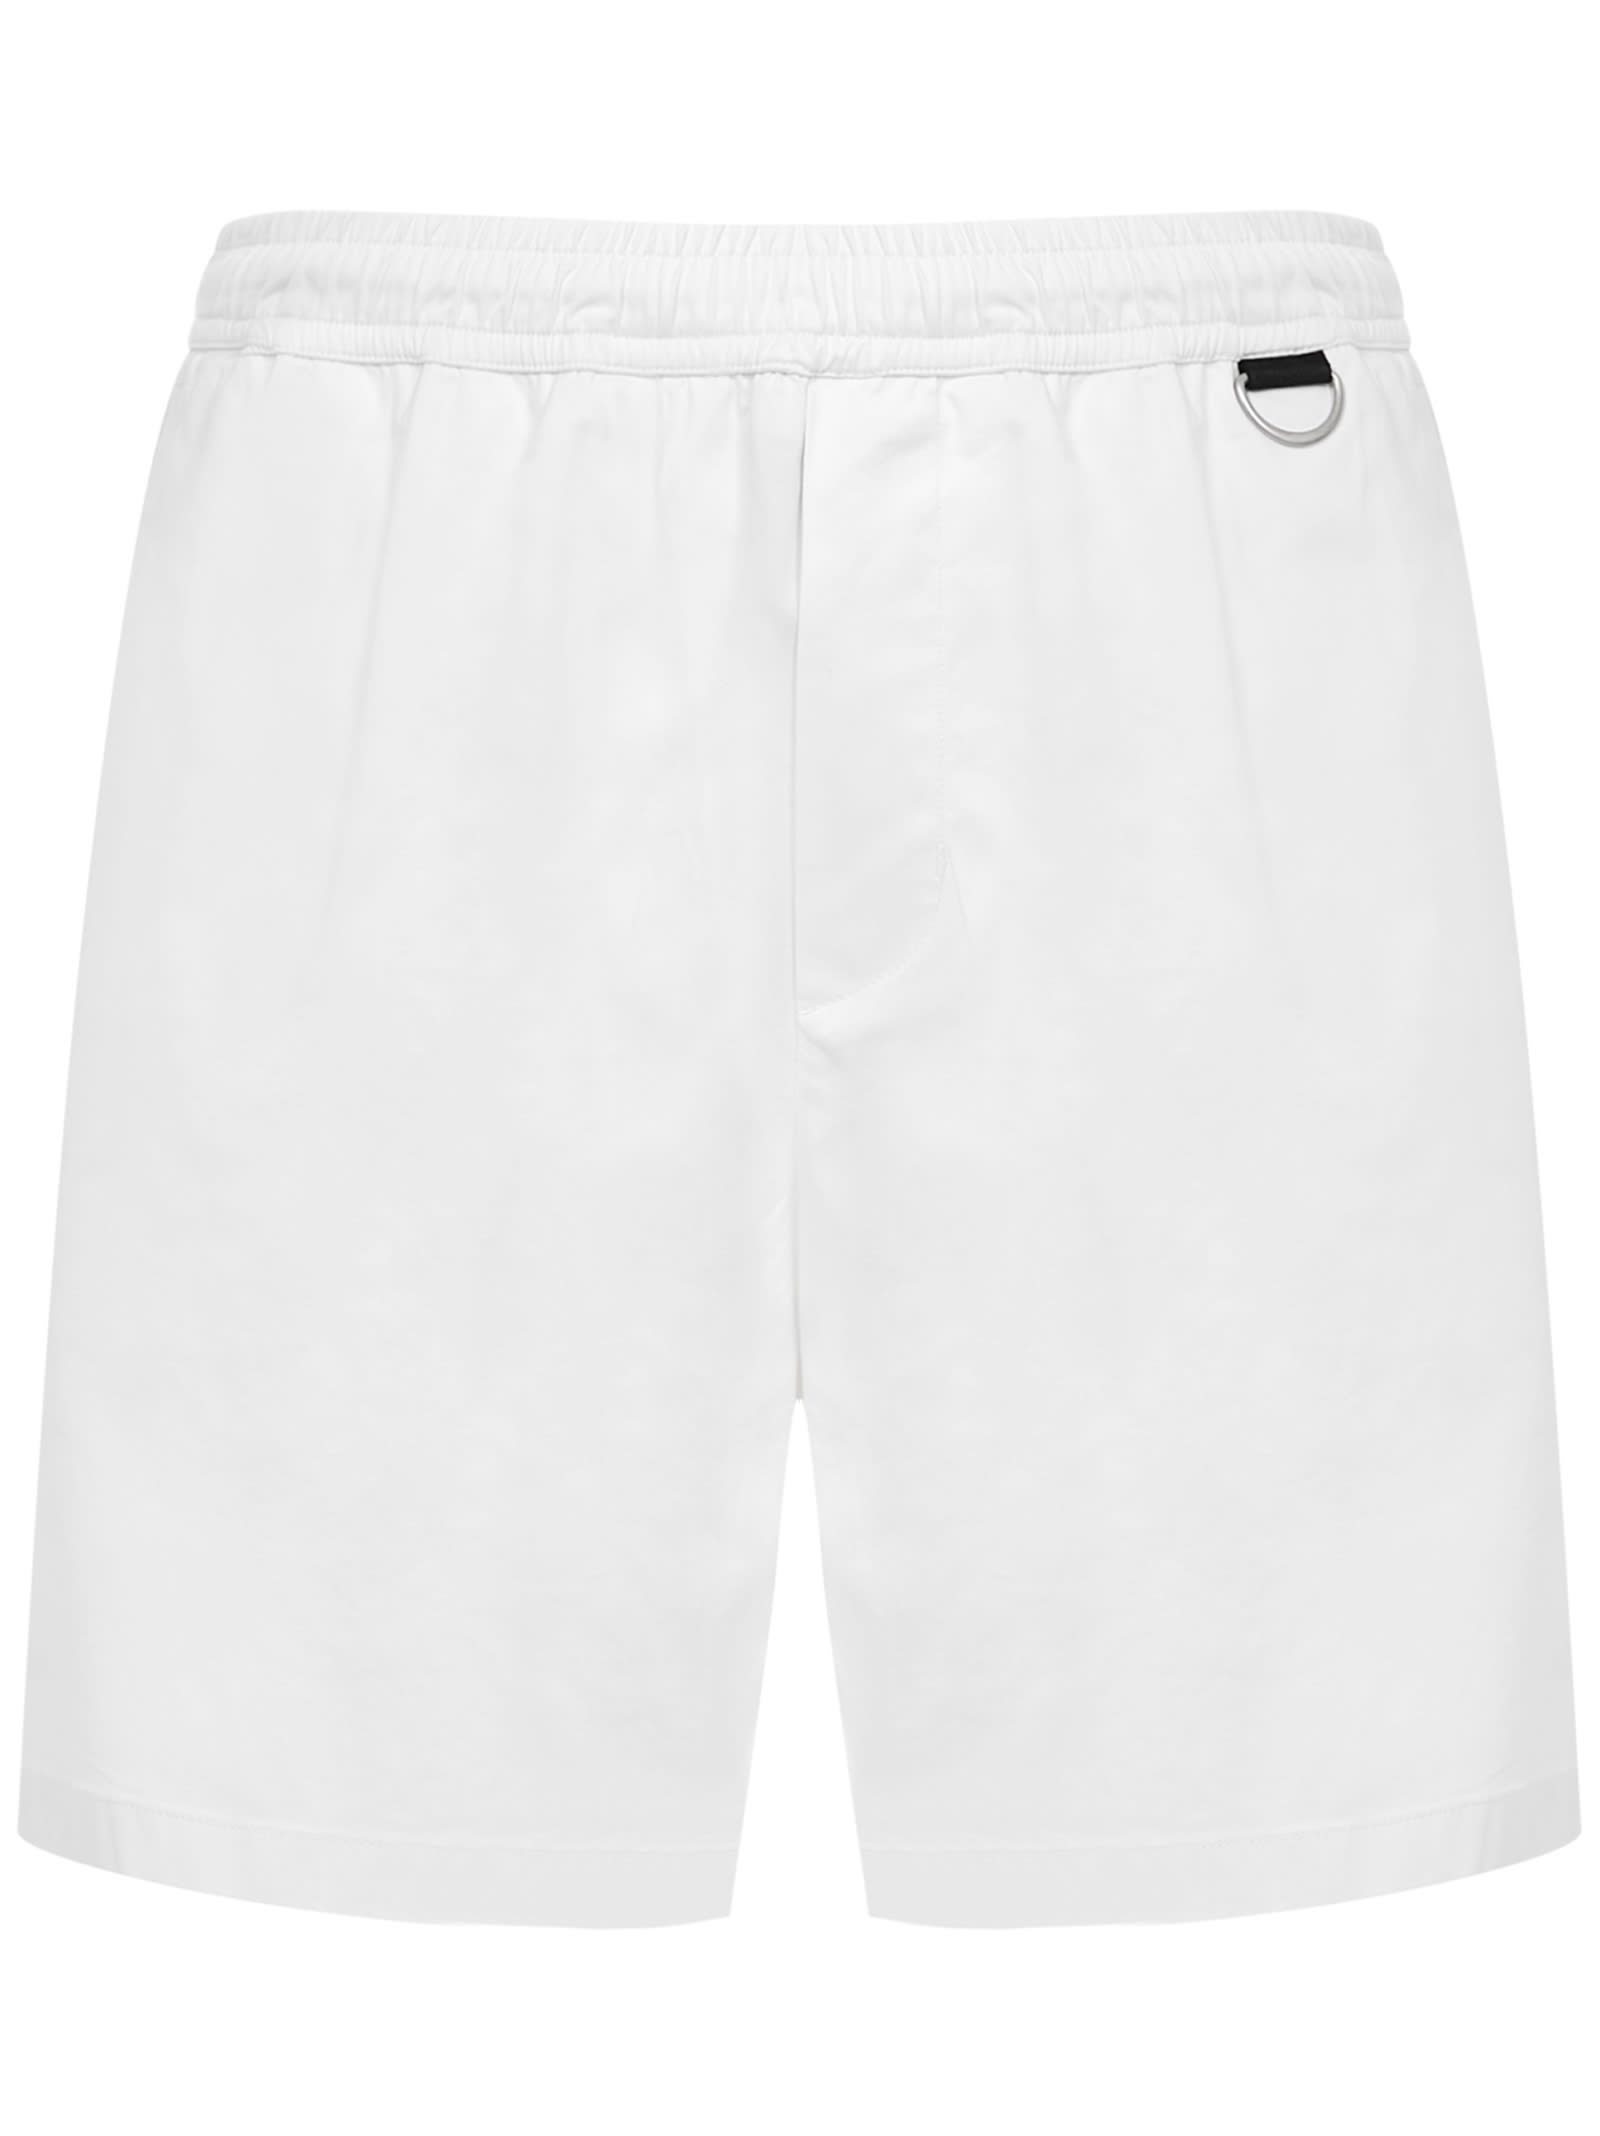 LOW BRAND SHORTS,L1PSS215724 A014